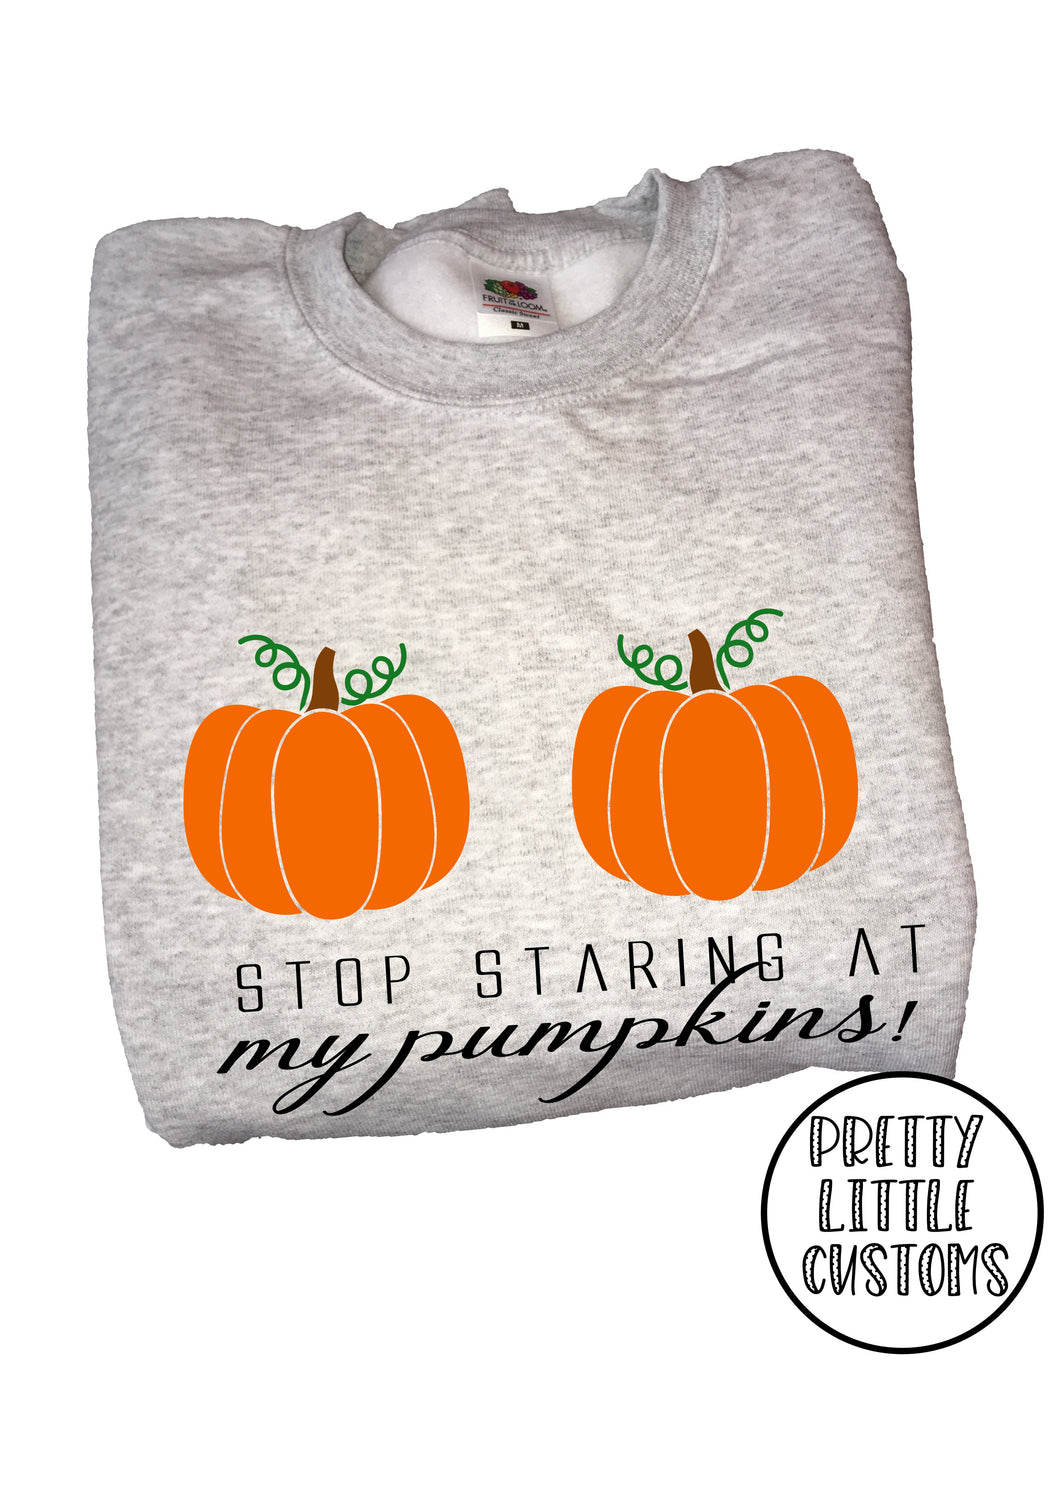 Stop staring at my pumpkins! funny Halloween sweater